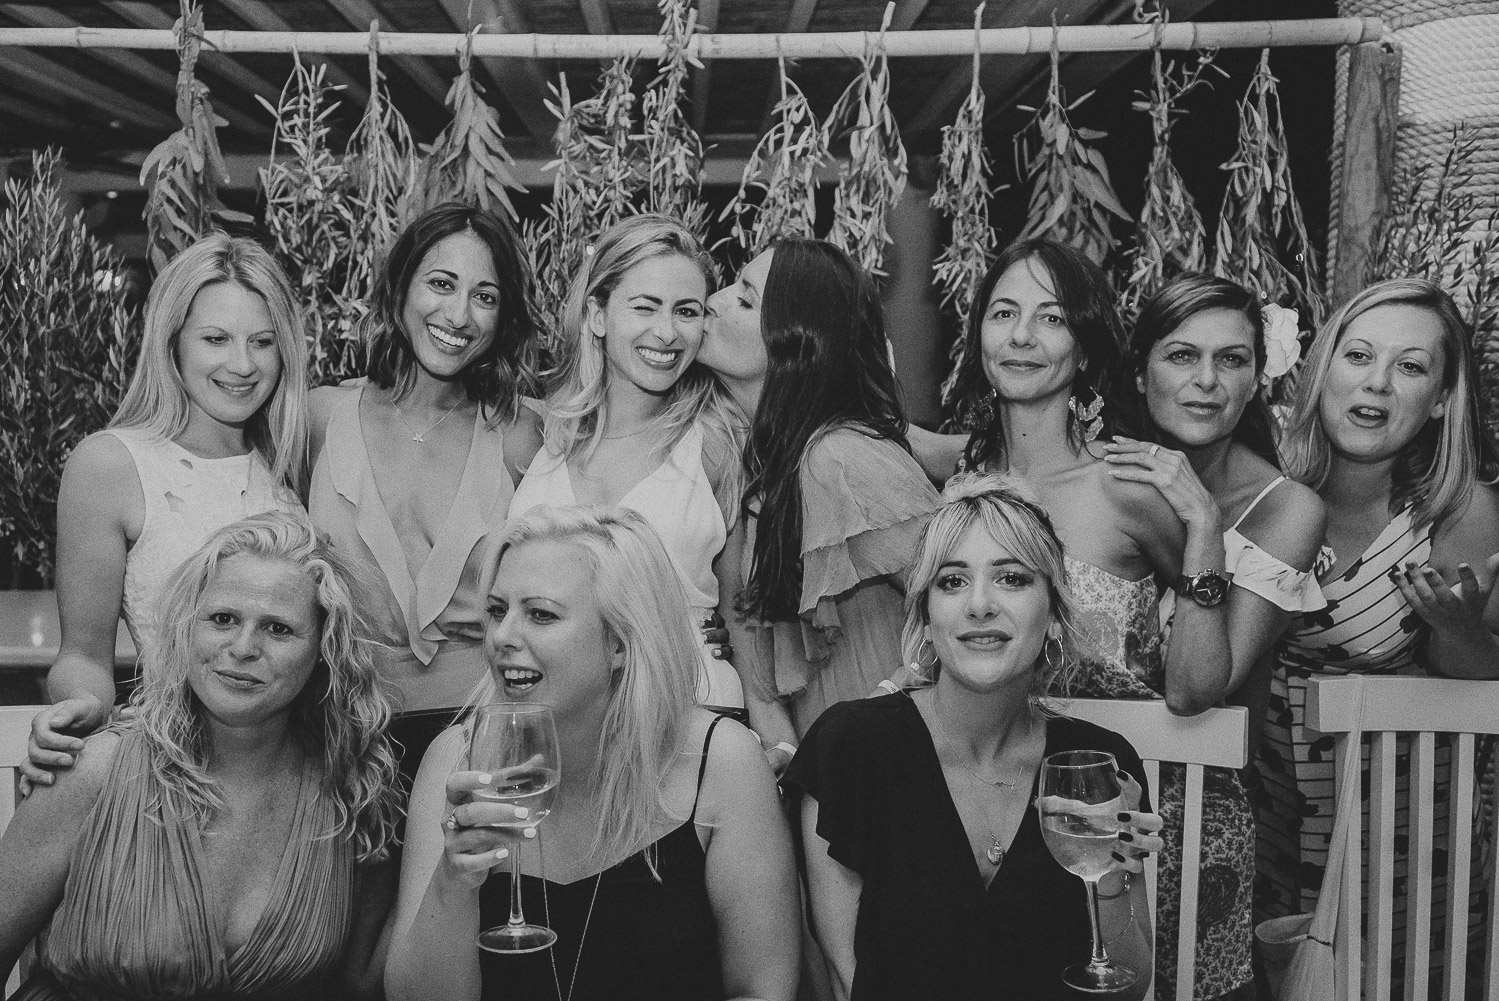 Wedding photographer Mykonos: black and white photo of the bride with her besties at Elia for her Mykonos wedding.